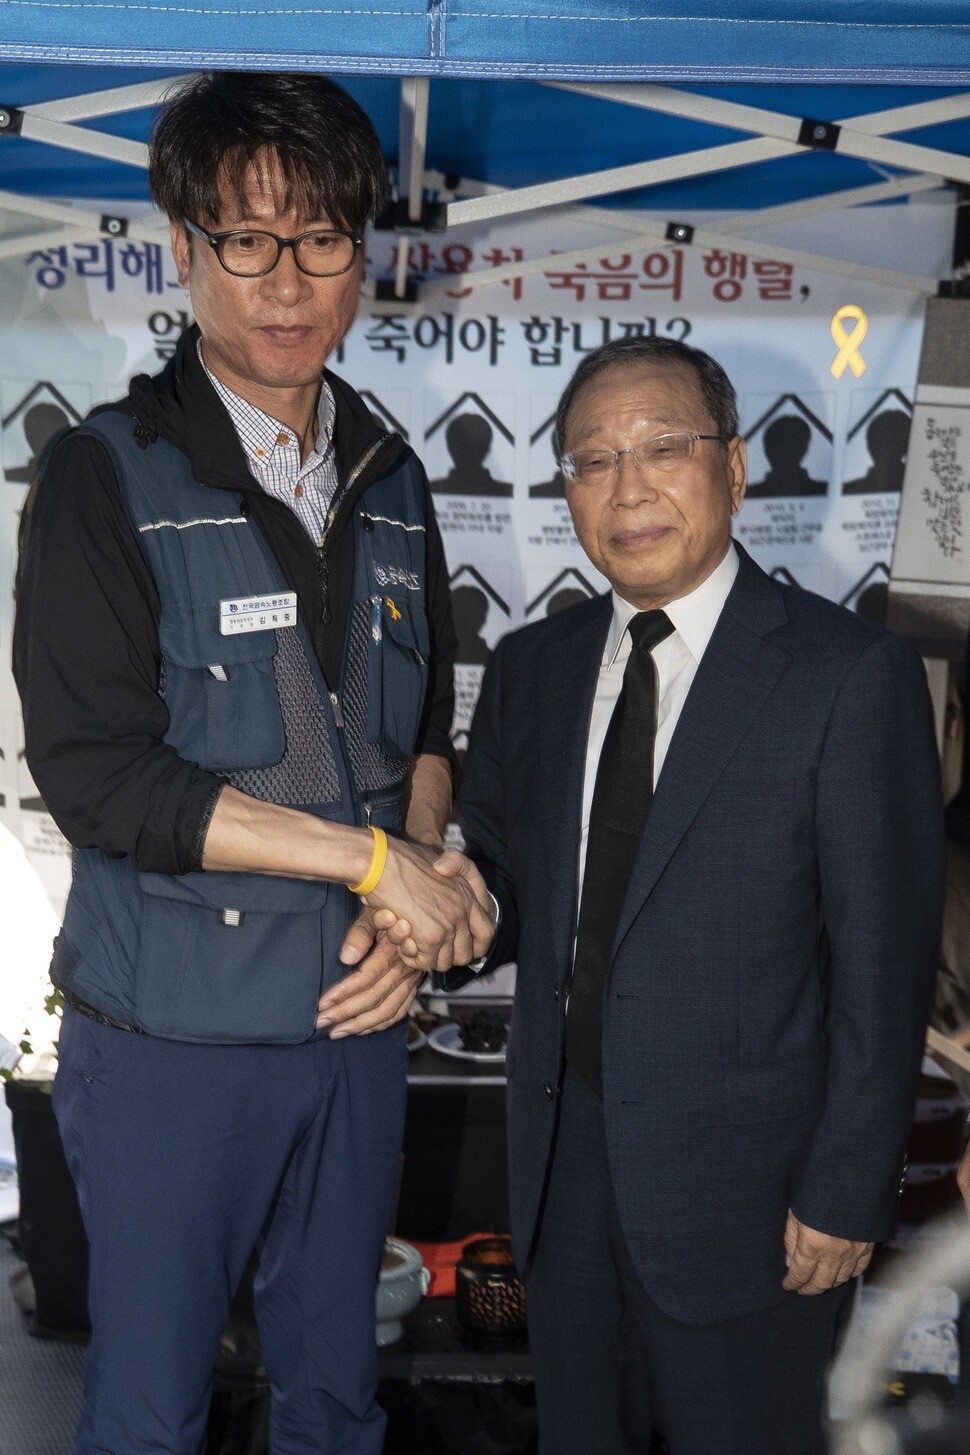 Choi shakes hands with Kim Deuk-jung